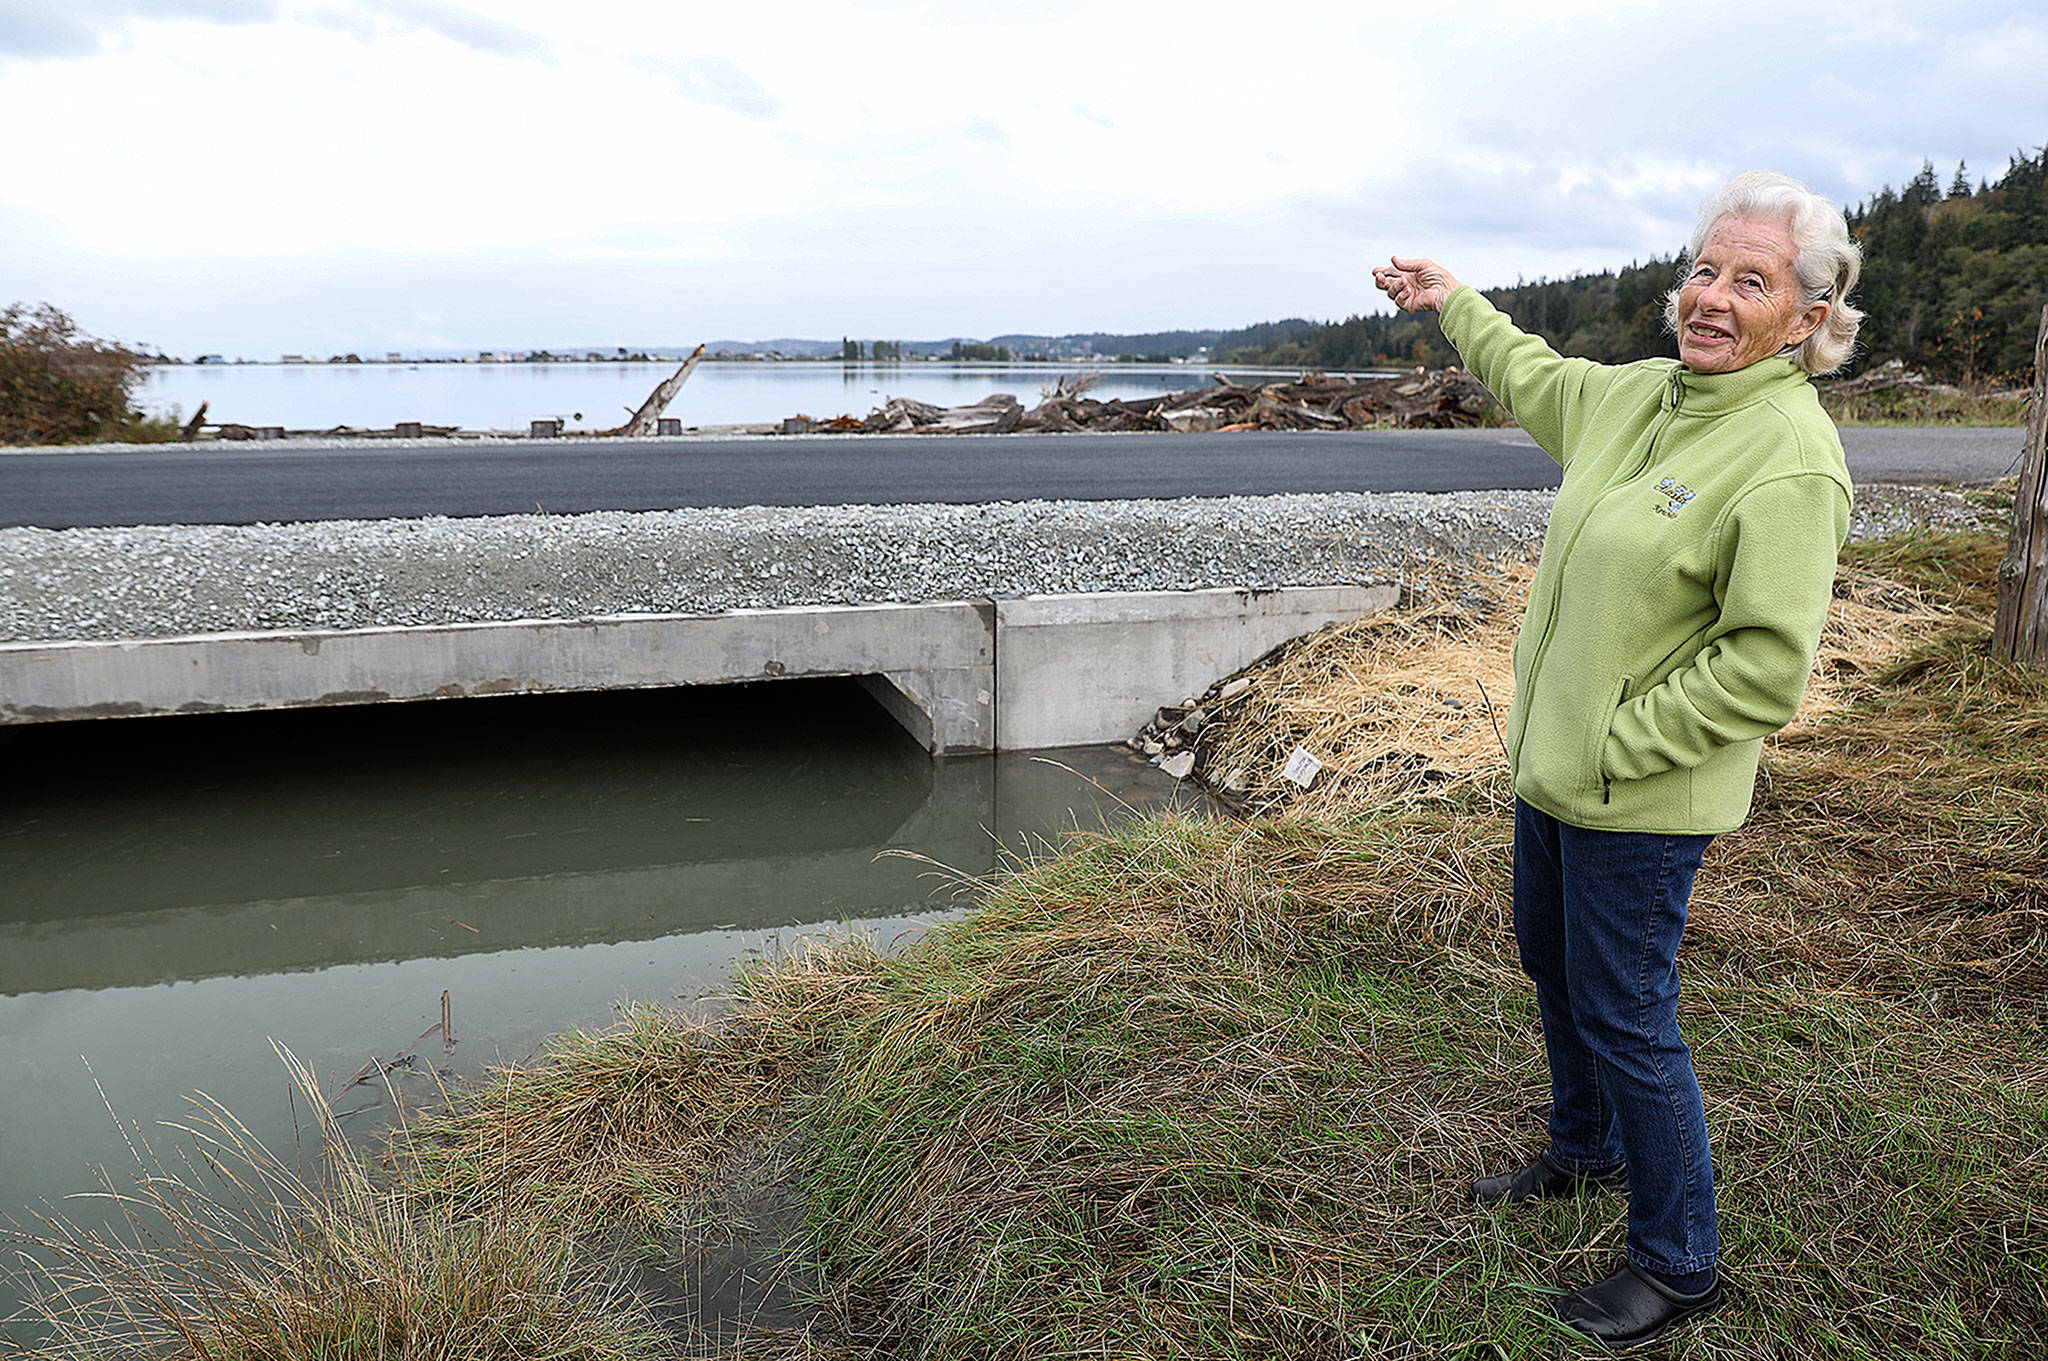 After more than a decade of planning, Barbara Brock finally saw new culverts installed near Triangle Cove on Camano Island. (Lizz Giordano / The Herald)